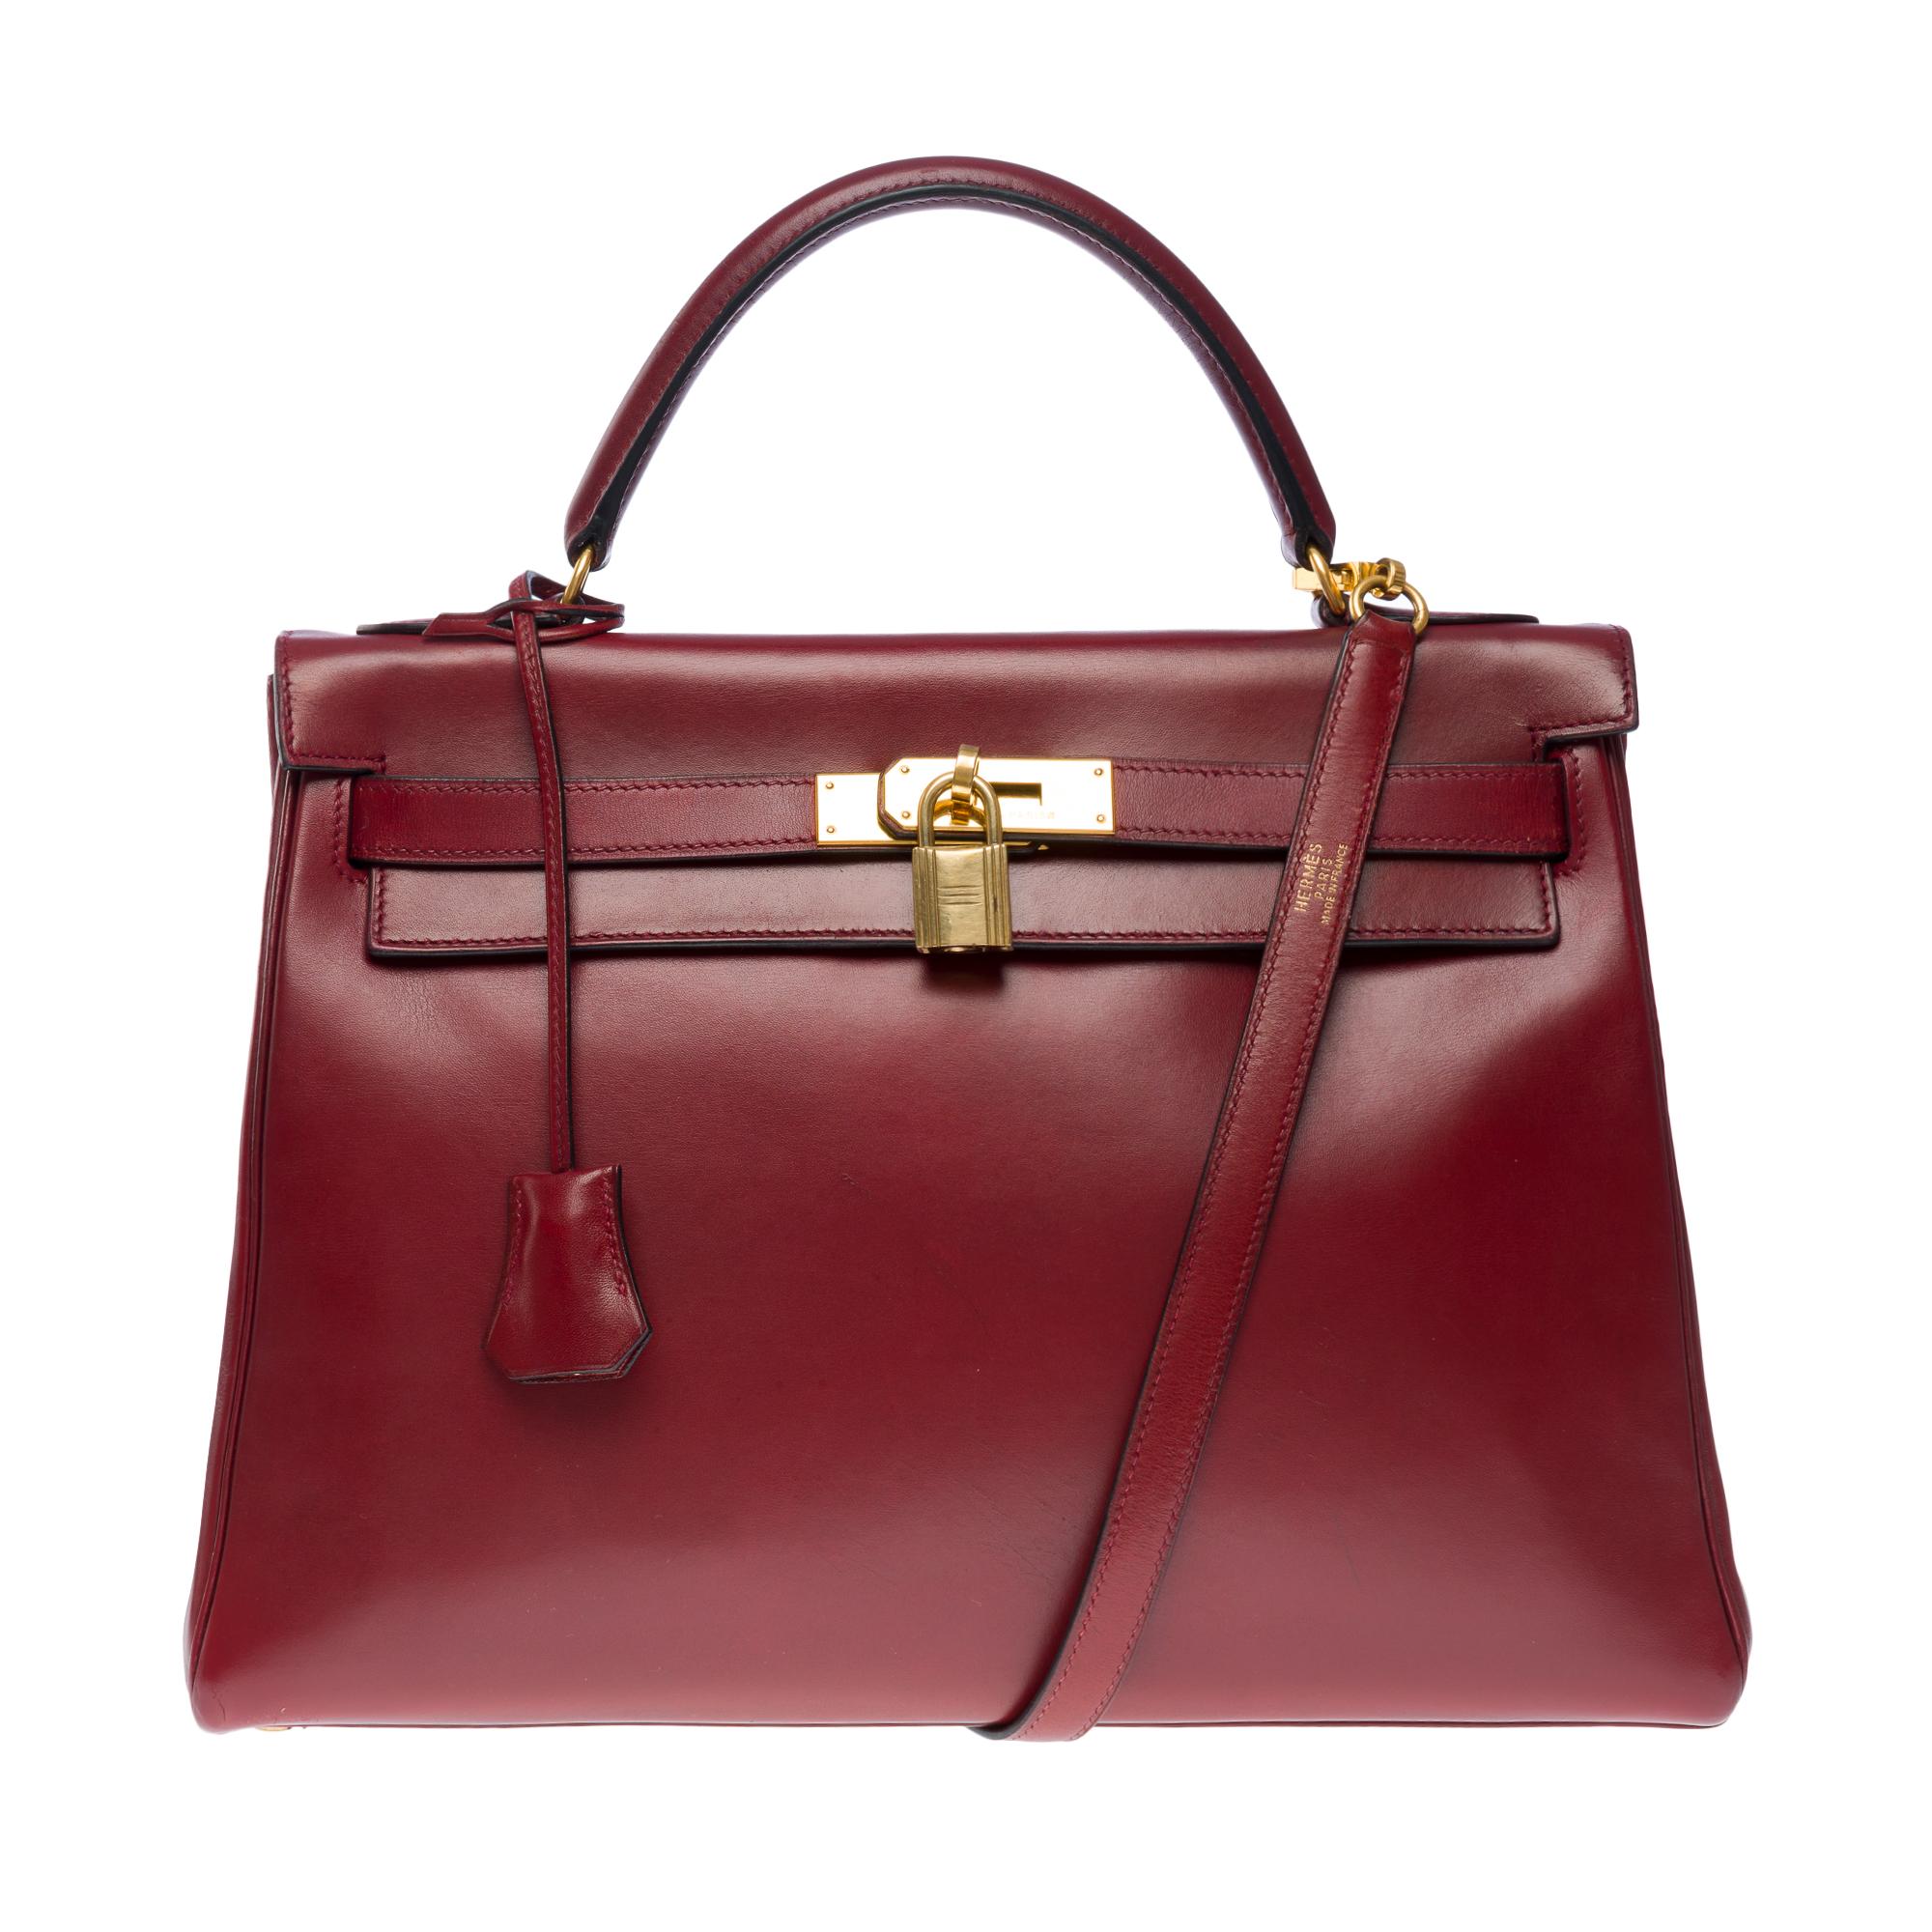 Gorgeous Hermes Kelly 32 retourne handbag strap in Rouge H (burgundy) box calf leather , gold plated metal trim, burgundy leather handle,   removable shoulder strap in burgundy leather for hand or shoulder carry

Flap closure
Inner lining in